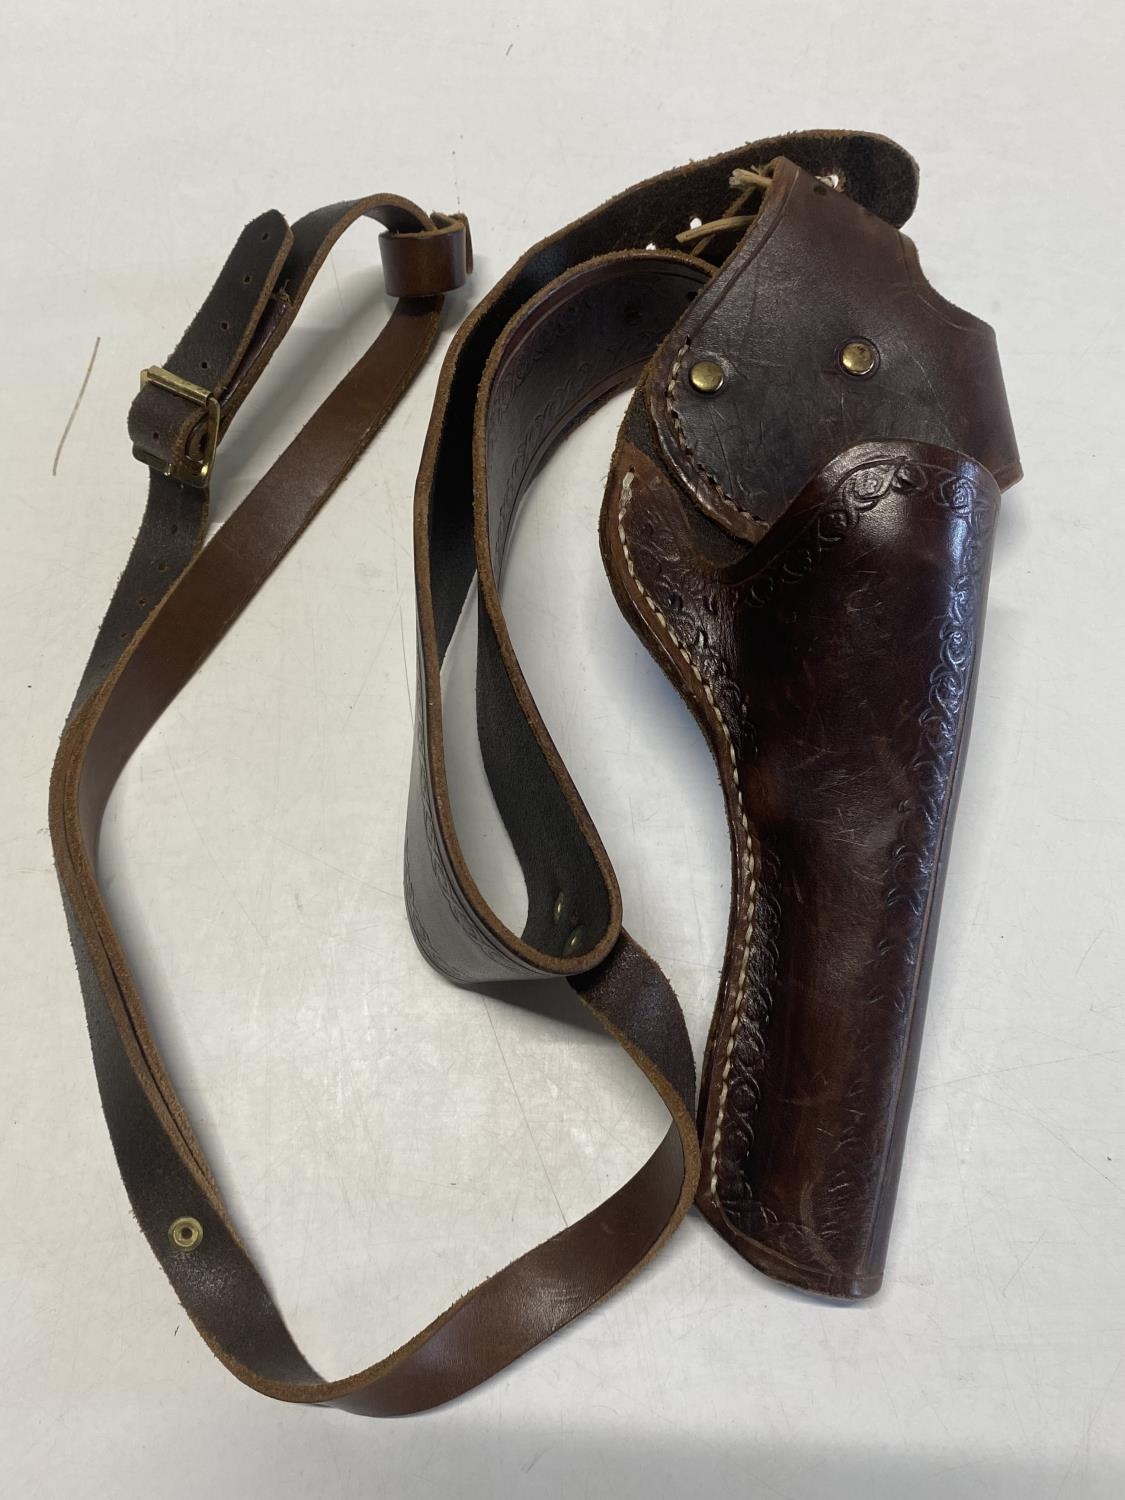 A reproduction 1849 Colt pocket muzzle loading revolver with a leather holster. Curret Firearms - Image 4 of 5